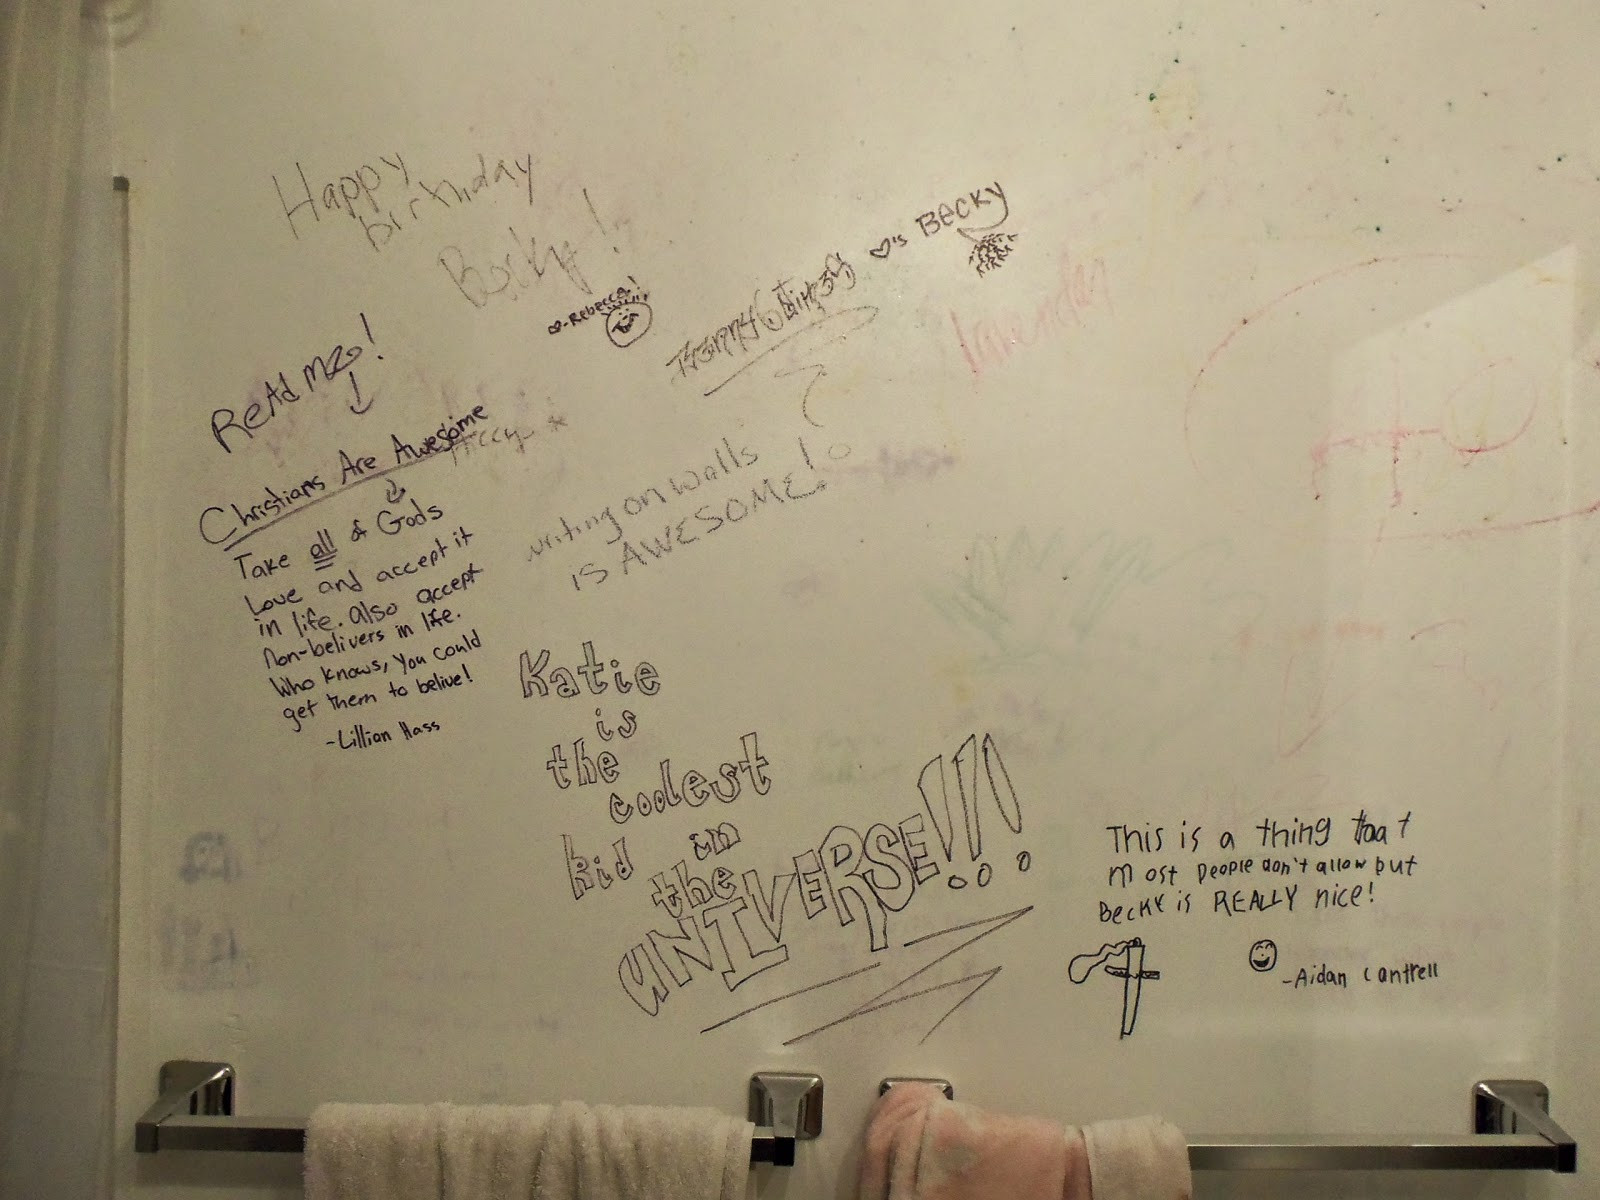 Bathroom Wall Writing
 We love our bathroom wall messages Katie was inspired to